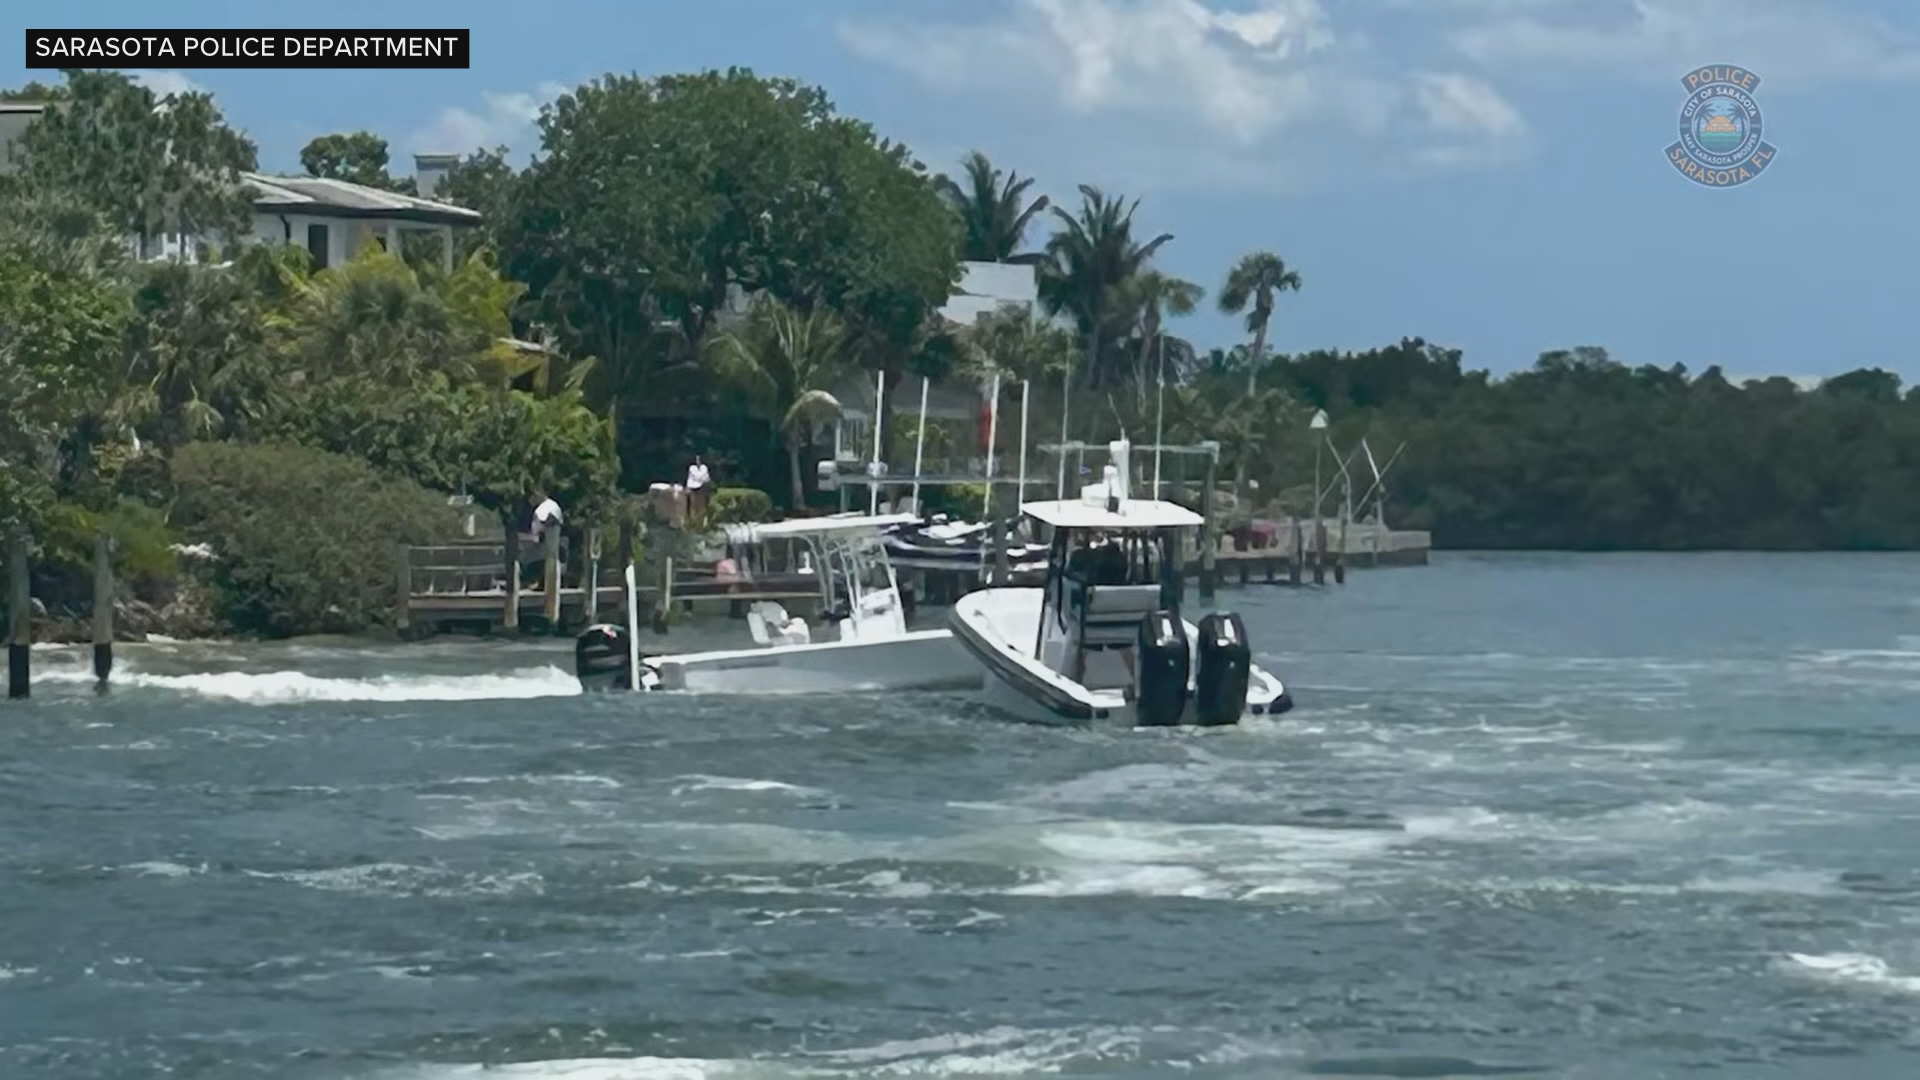 Sarasota police said a boater hit a wake and hit his head, causing him to fall face-down on the deck while the boat went in circles.